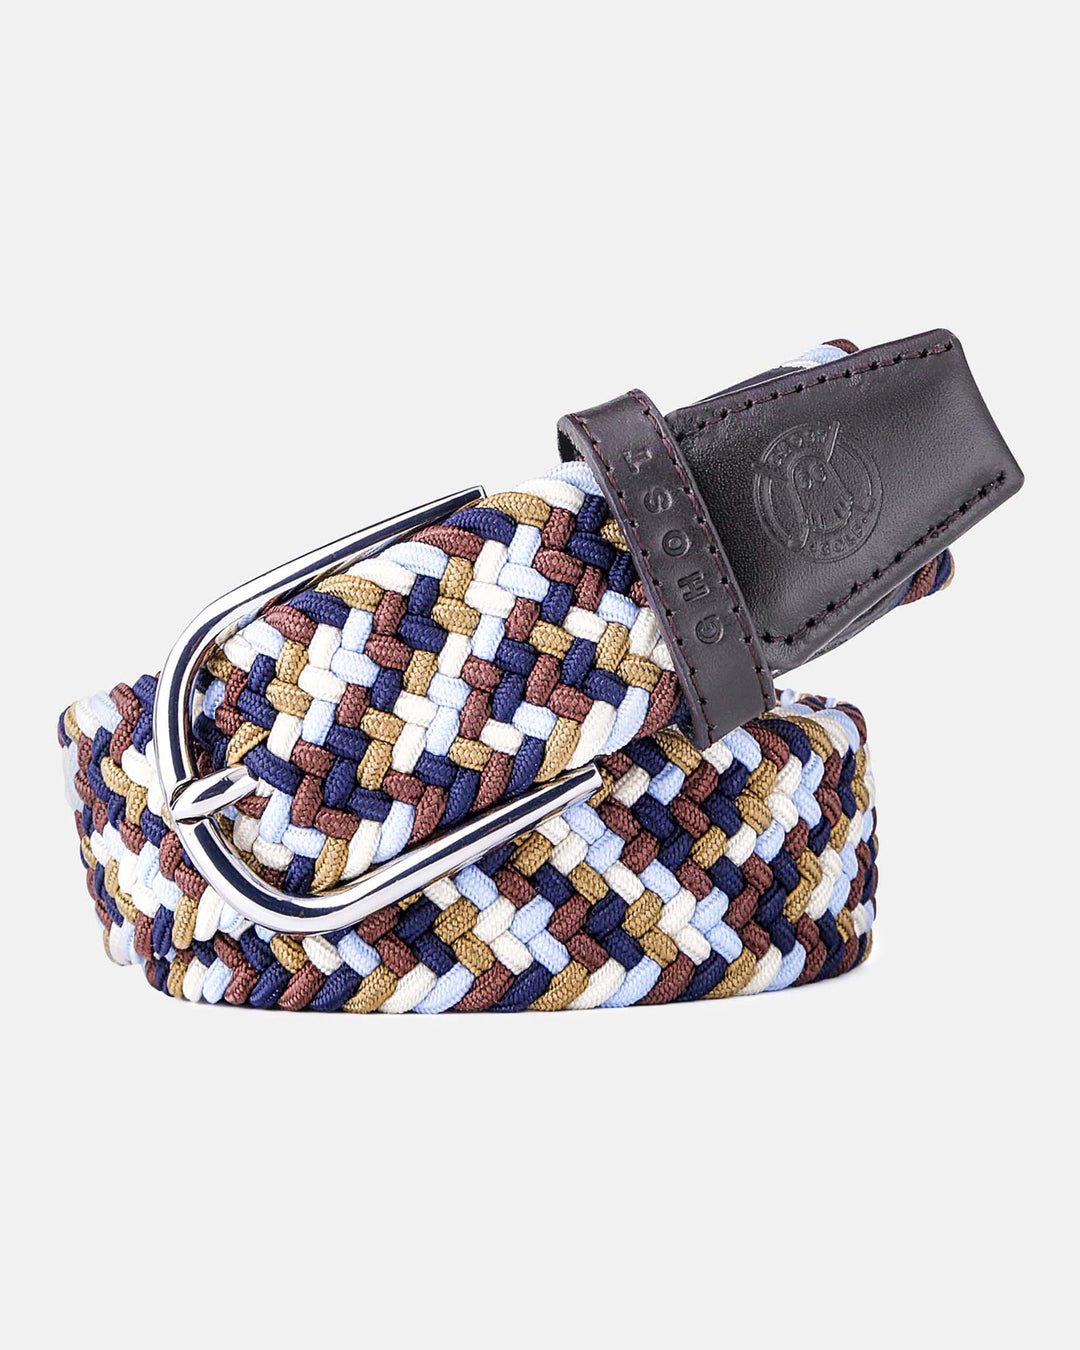 Ghost Golf Dark Brown/Navy Blue/Khaki Multi Color Belt with Rounded Steel Buckle and Dark Brown Leather Tail